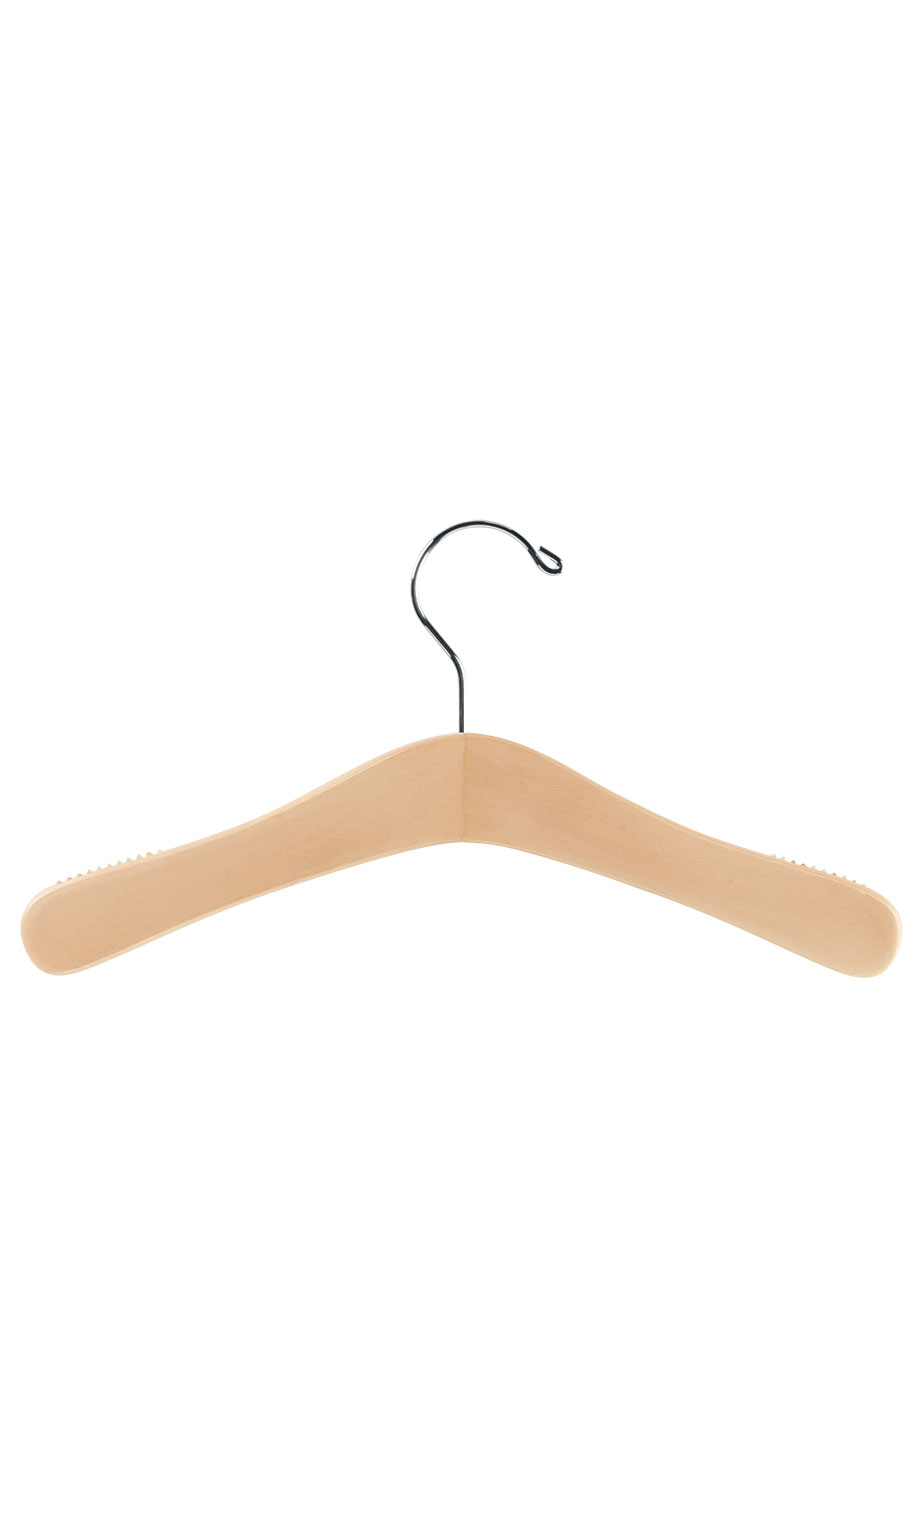 SSWBasics 12 inch Wood Childrens Skirt and Pants Hangers Case of 50